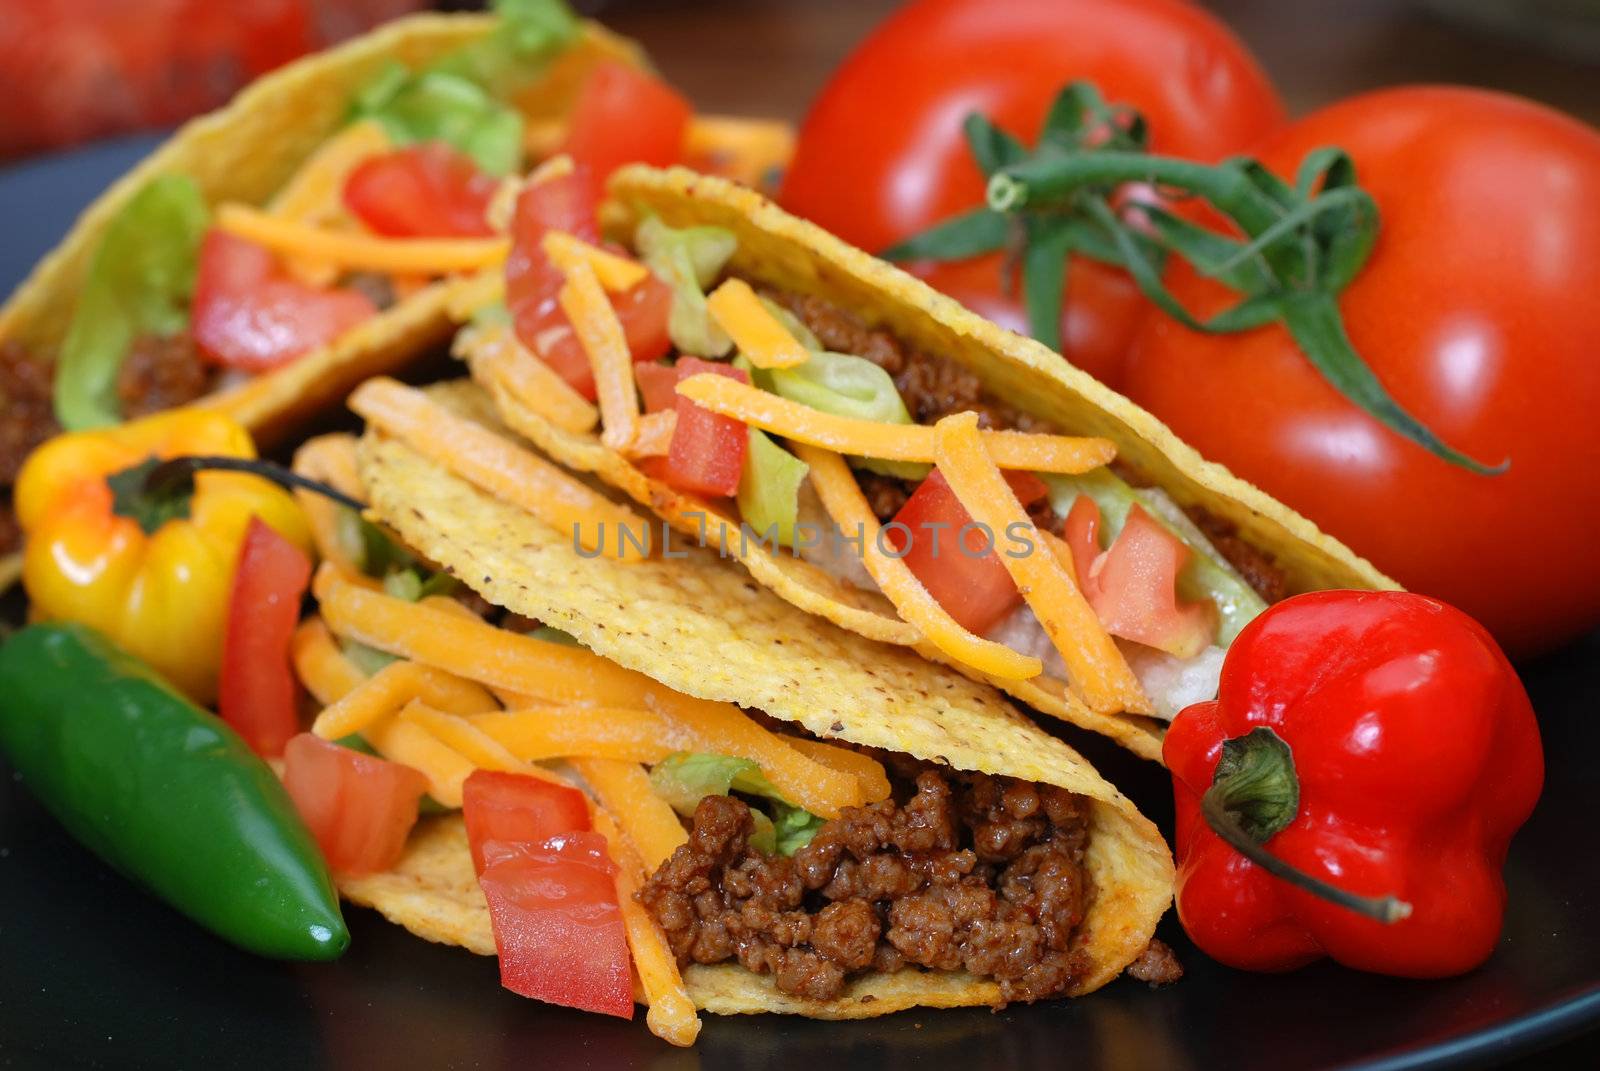 Closeup of tacos on plate with tomatoes, habanero and serano peppers.